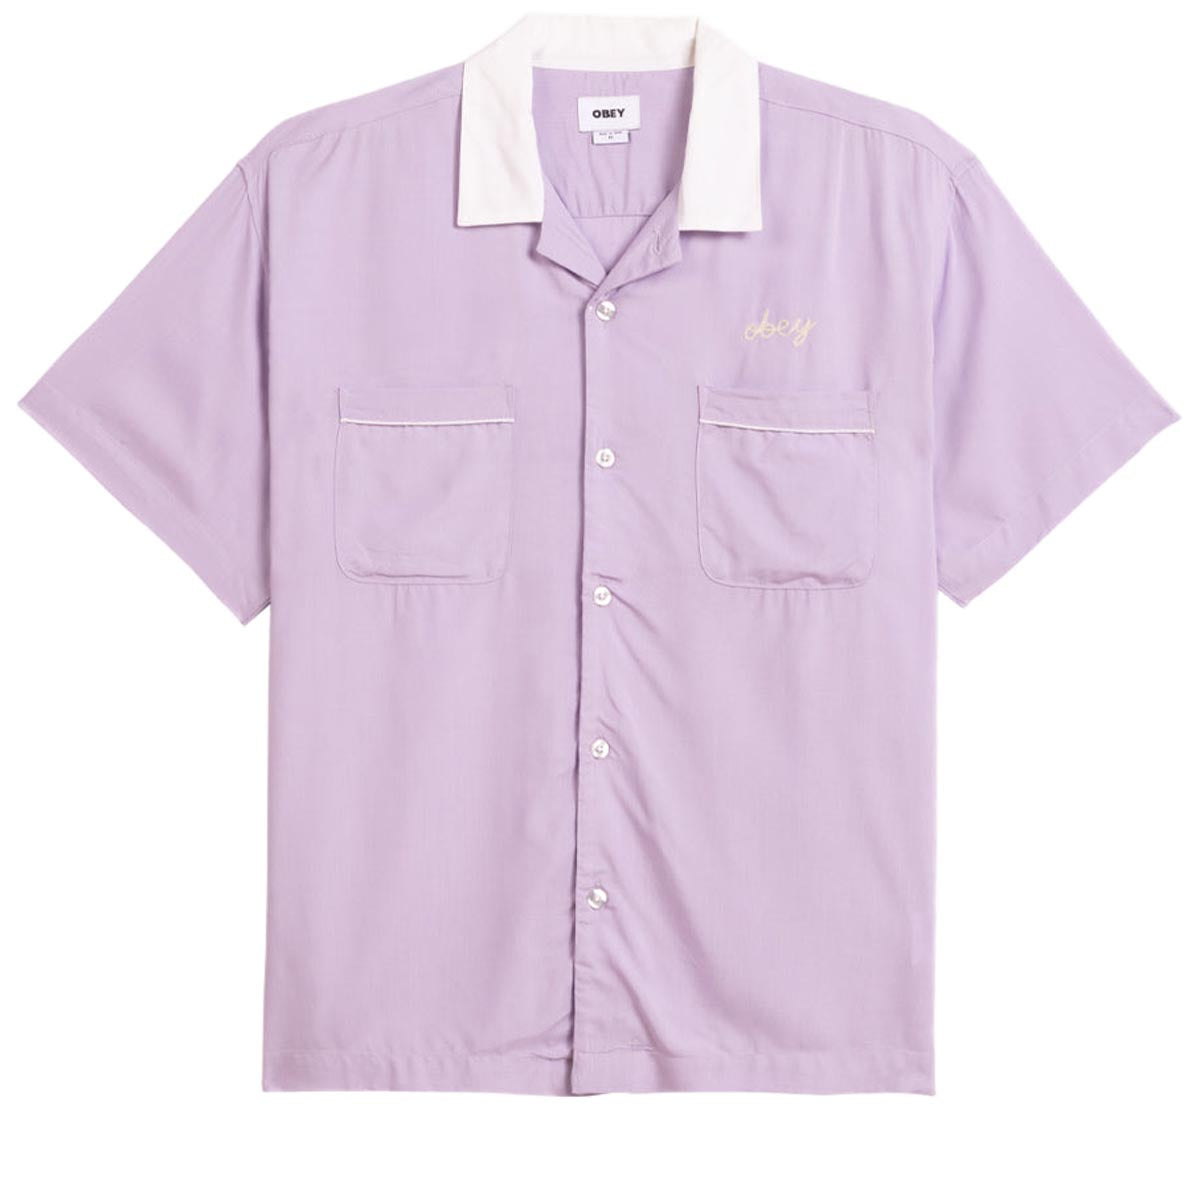 Obey Badger Woven Shirt - Orchid Petal image 1